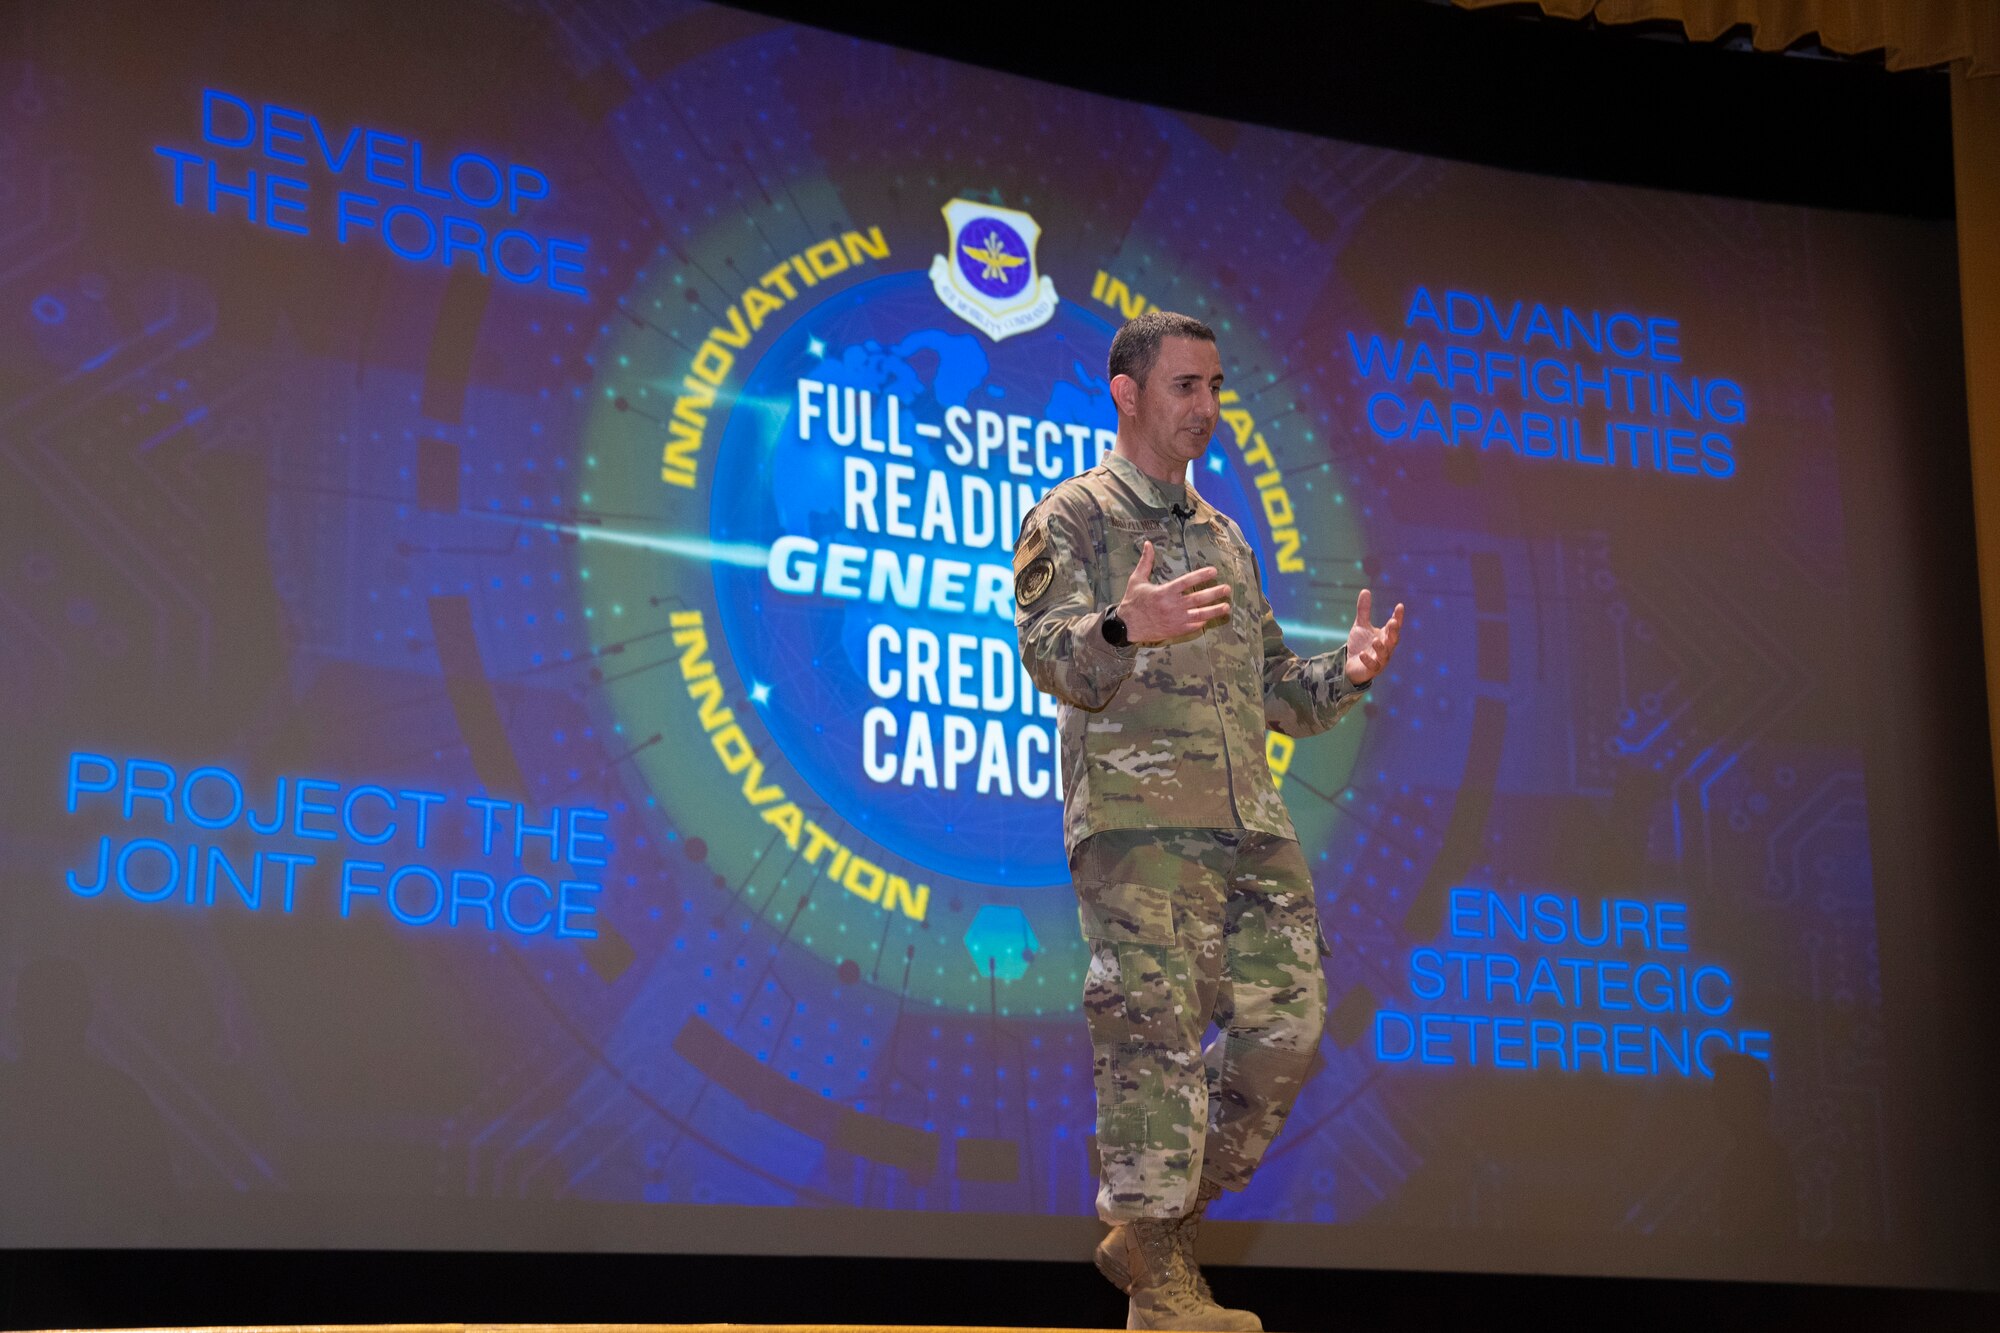 Chief Master Sgt. Brian Kruzelnick, the Air Mobility Command (AMC) command chief, speaks during a commander’s call at MacDill Air Force Base, Fla., April 28, 2021.